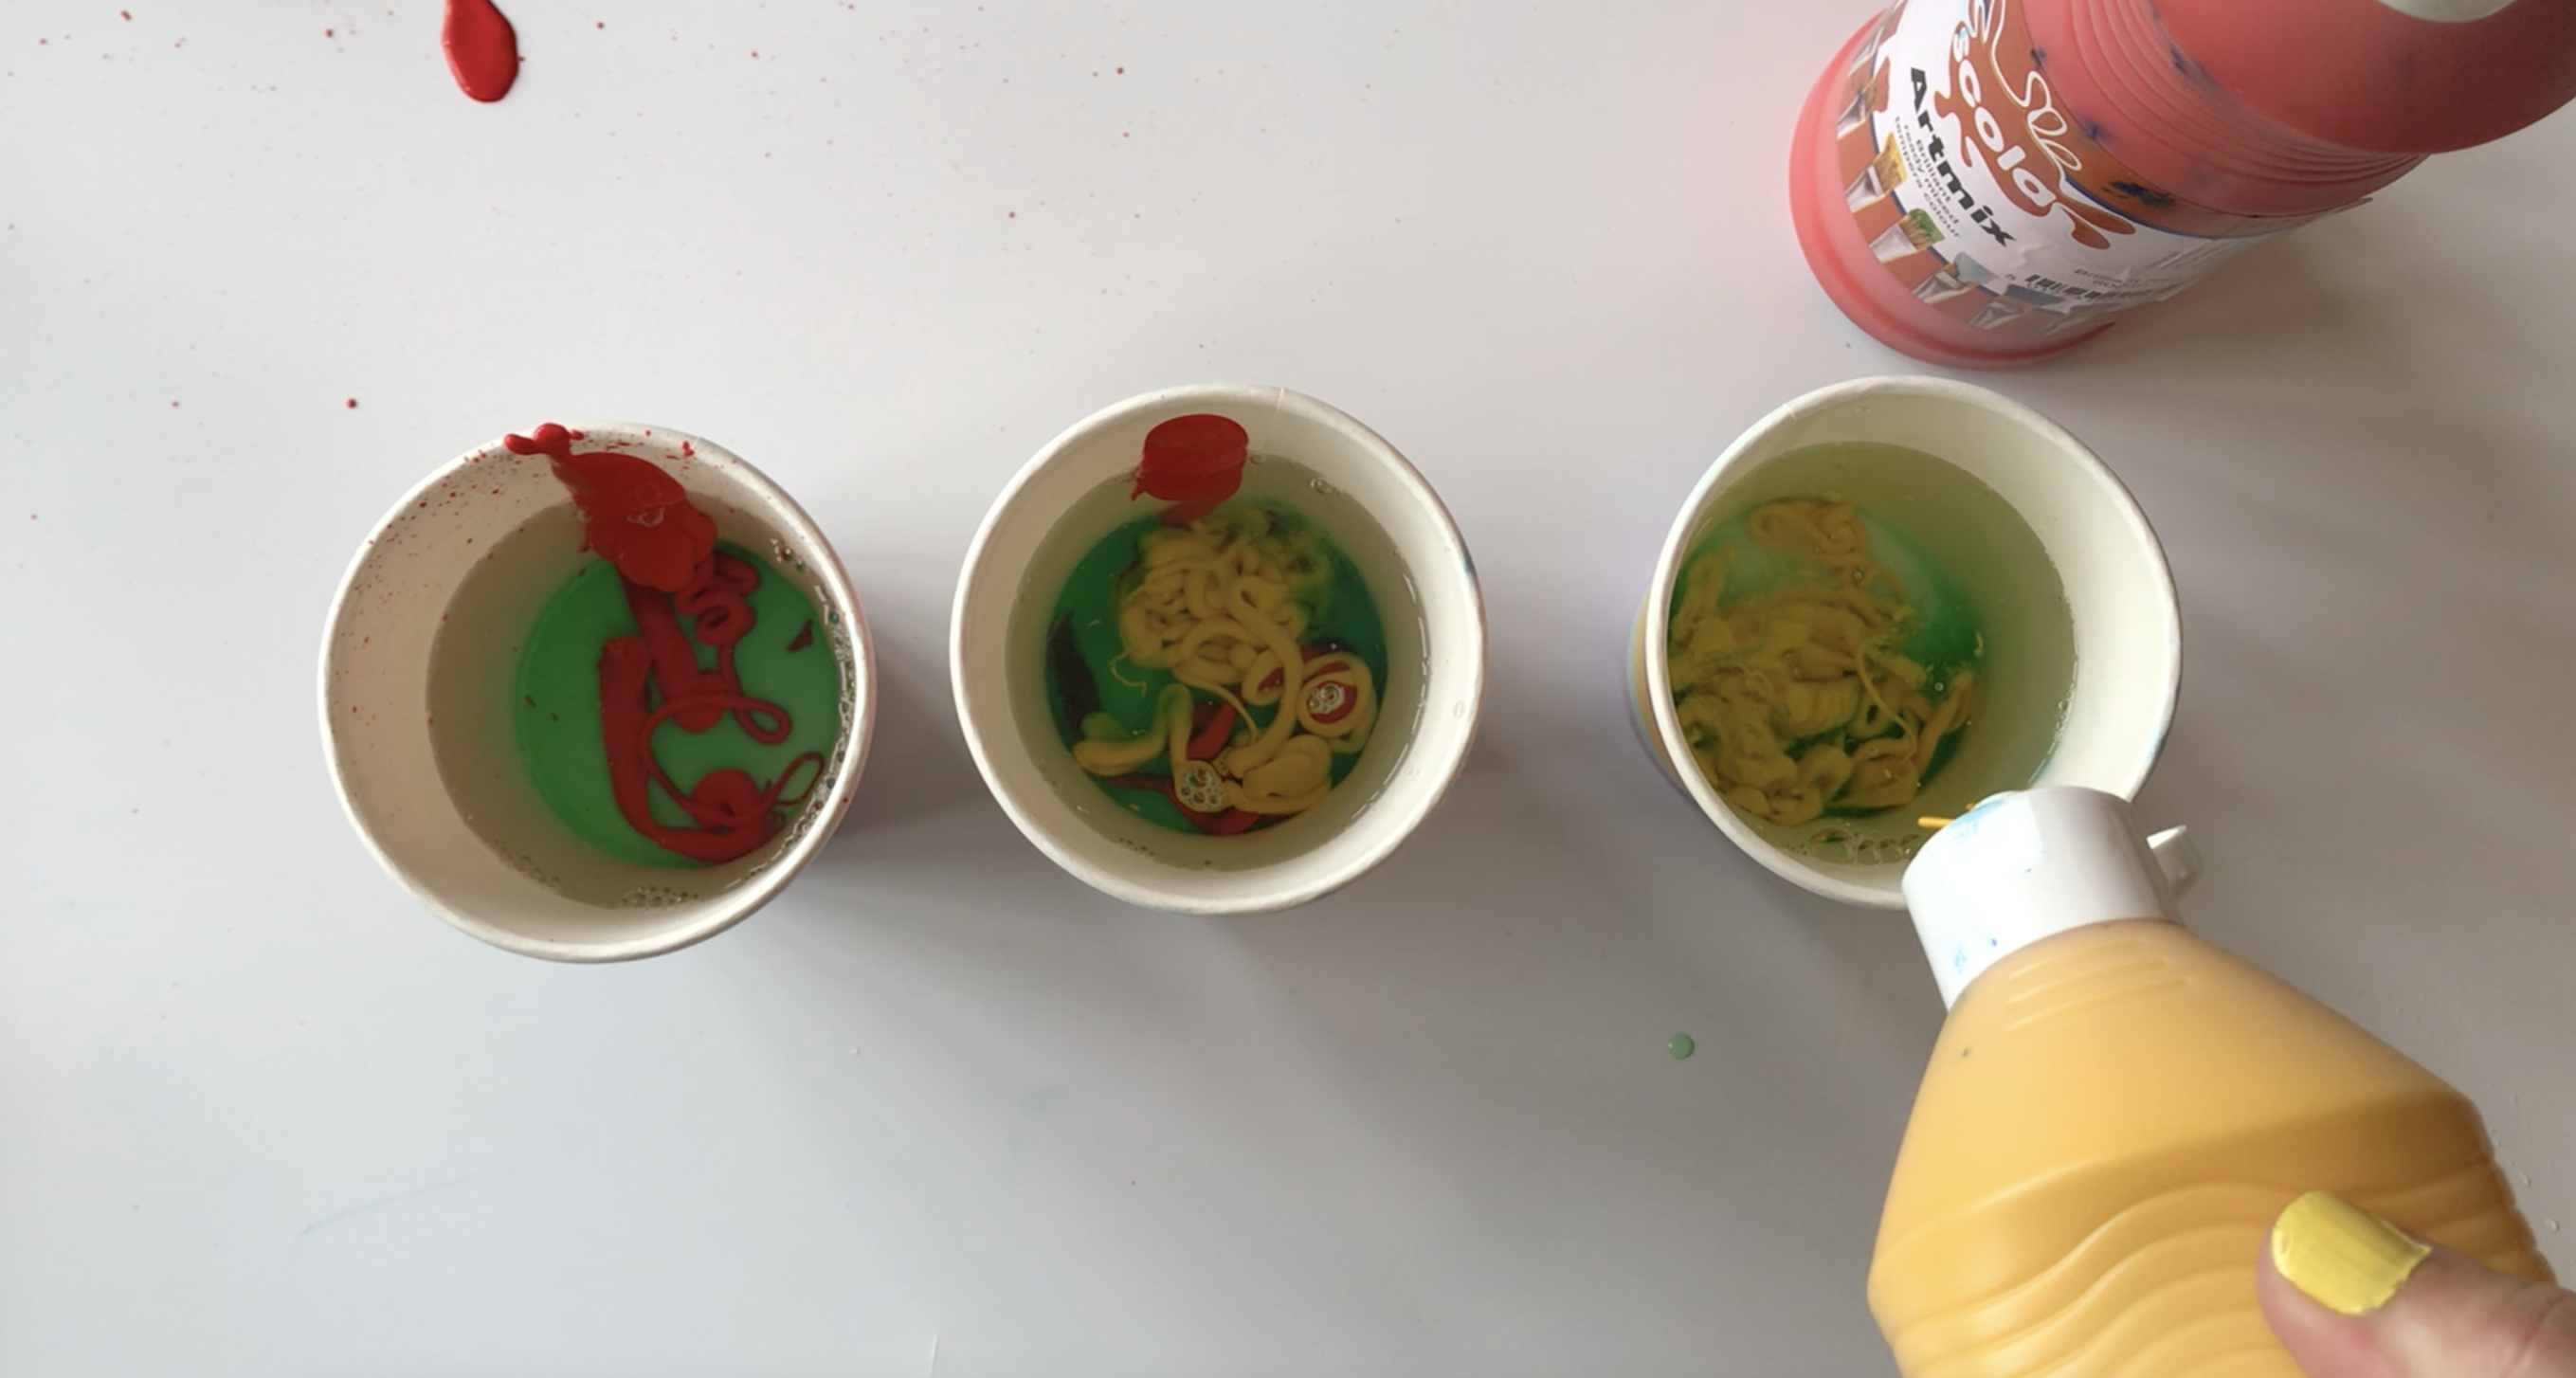 Add some paint into each cup